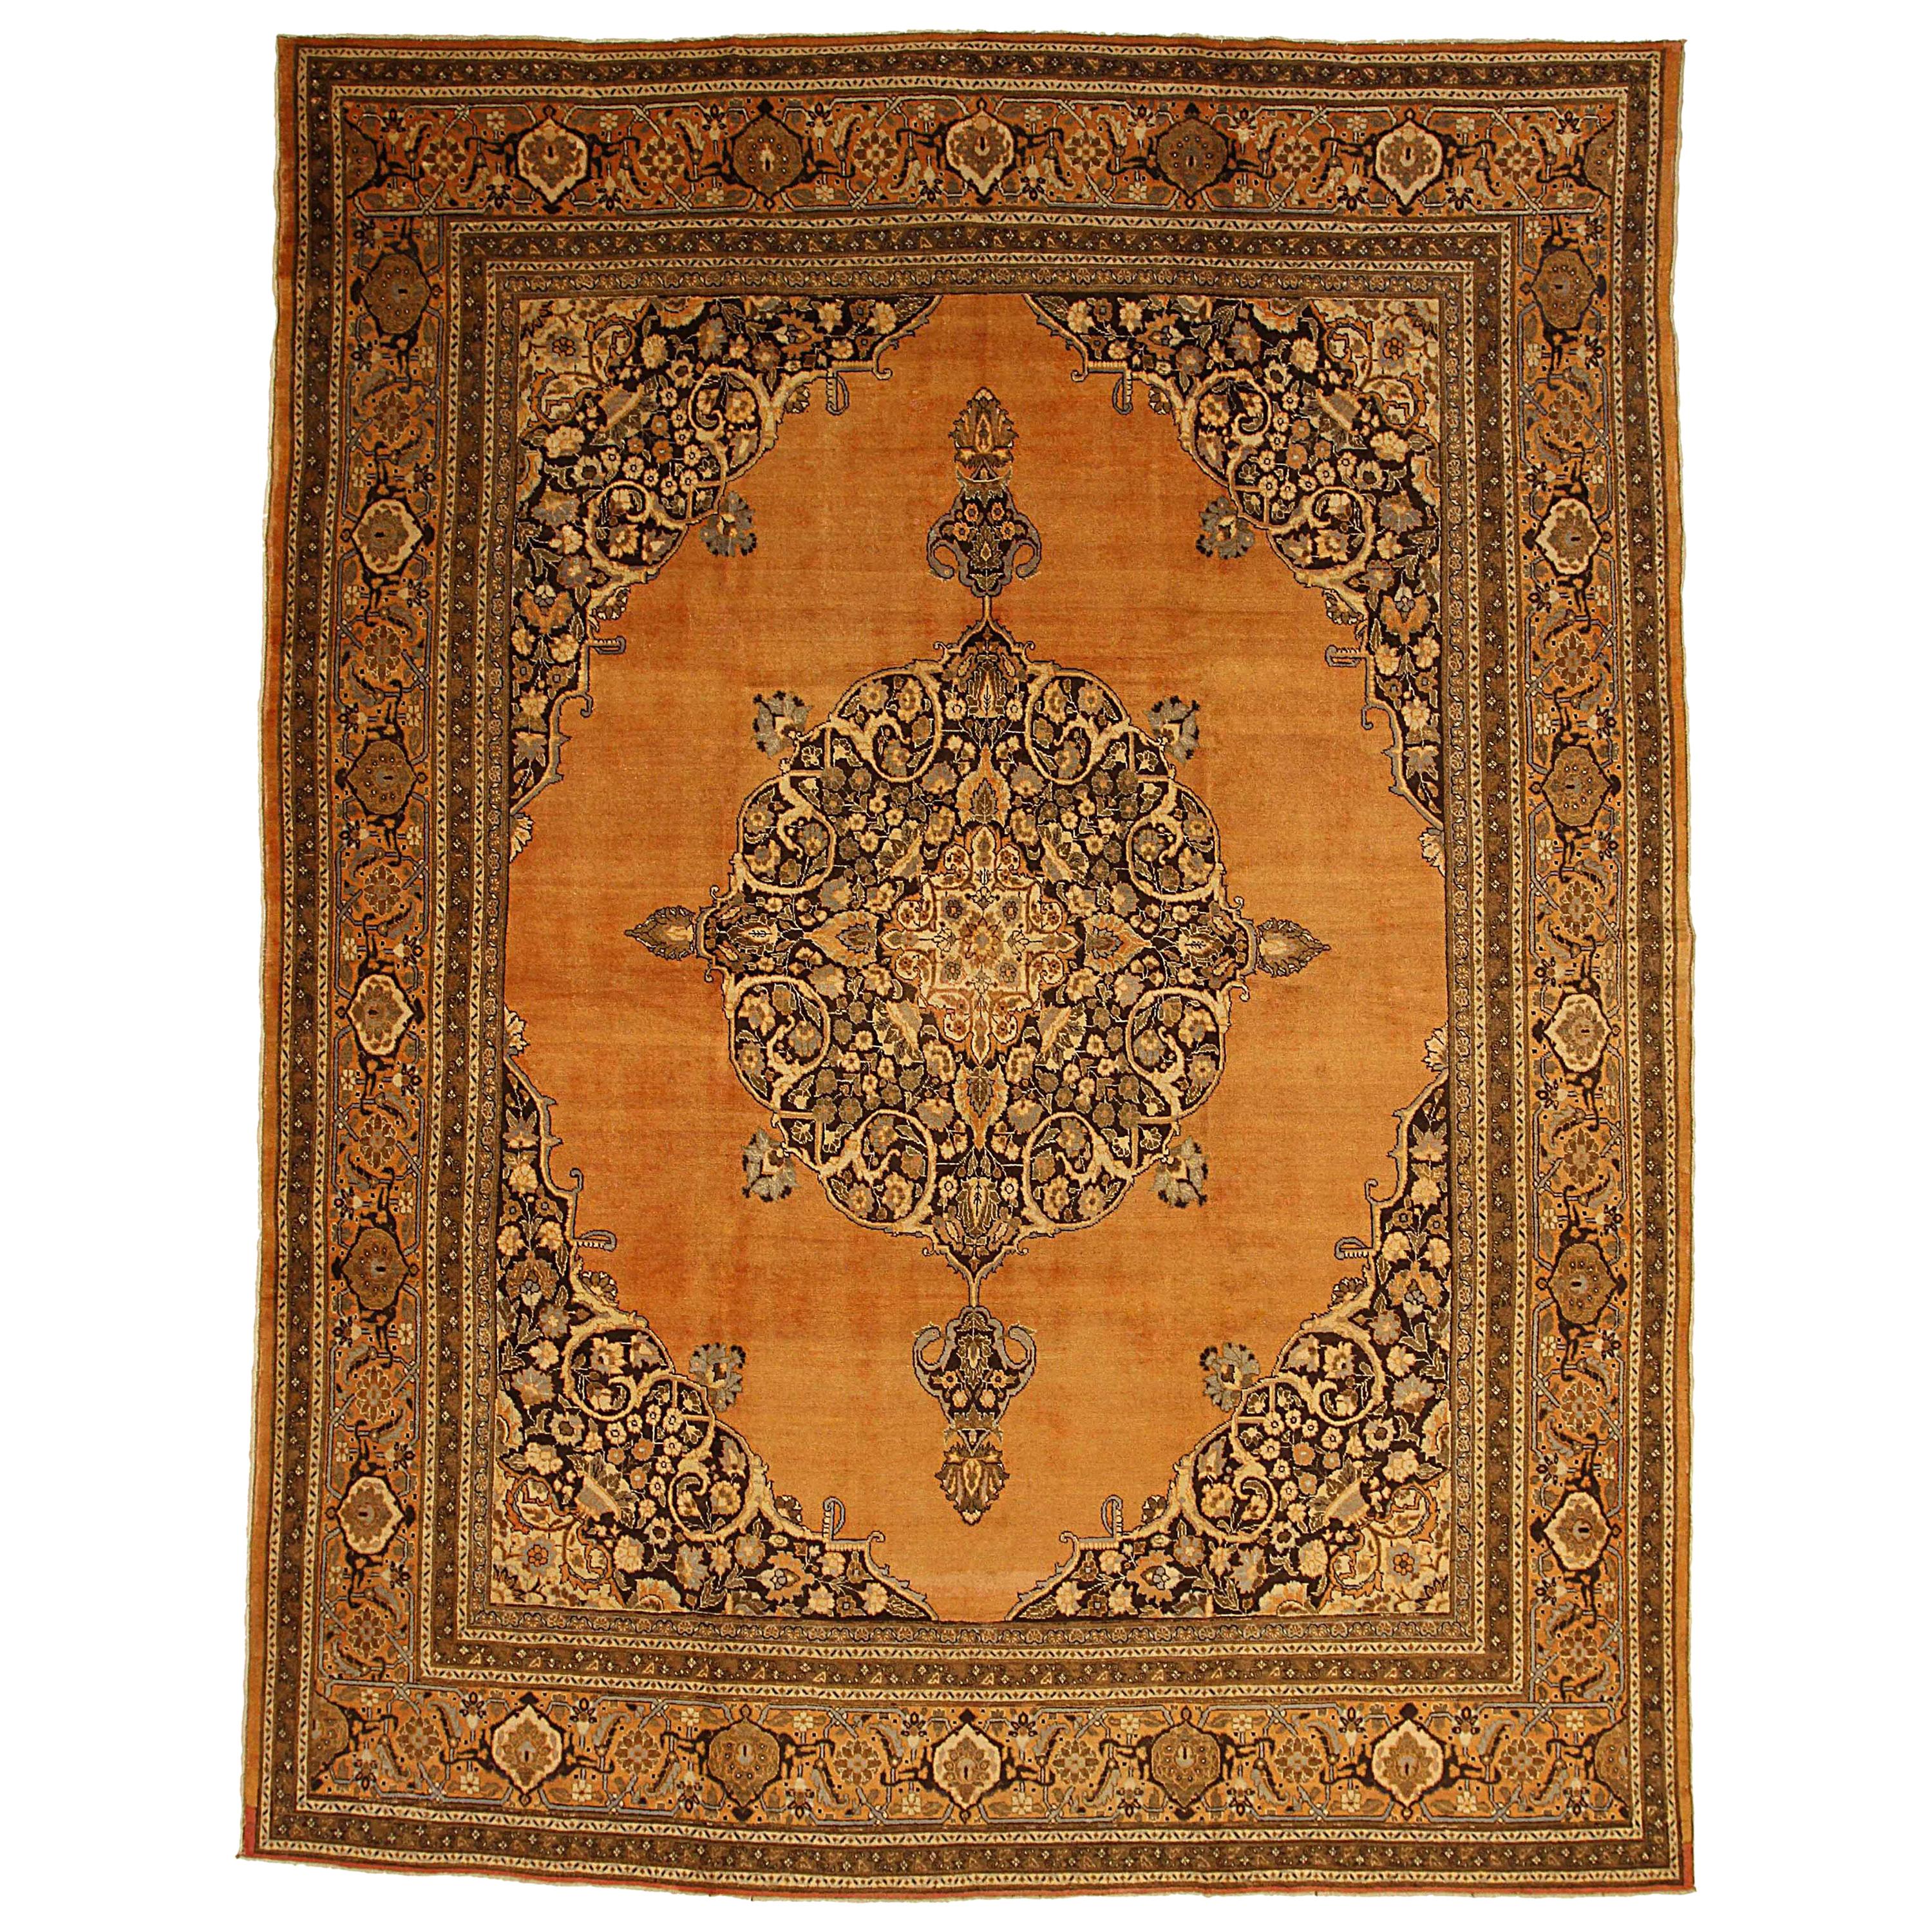 Antique Persian Hajjalili Rug with Central Medallion and Floral Art, circa 1910s